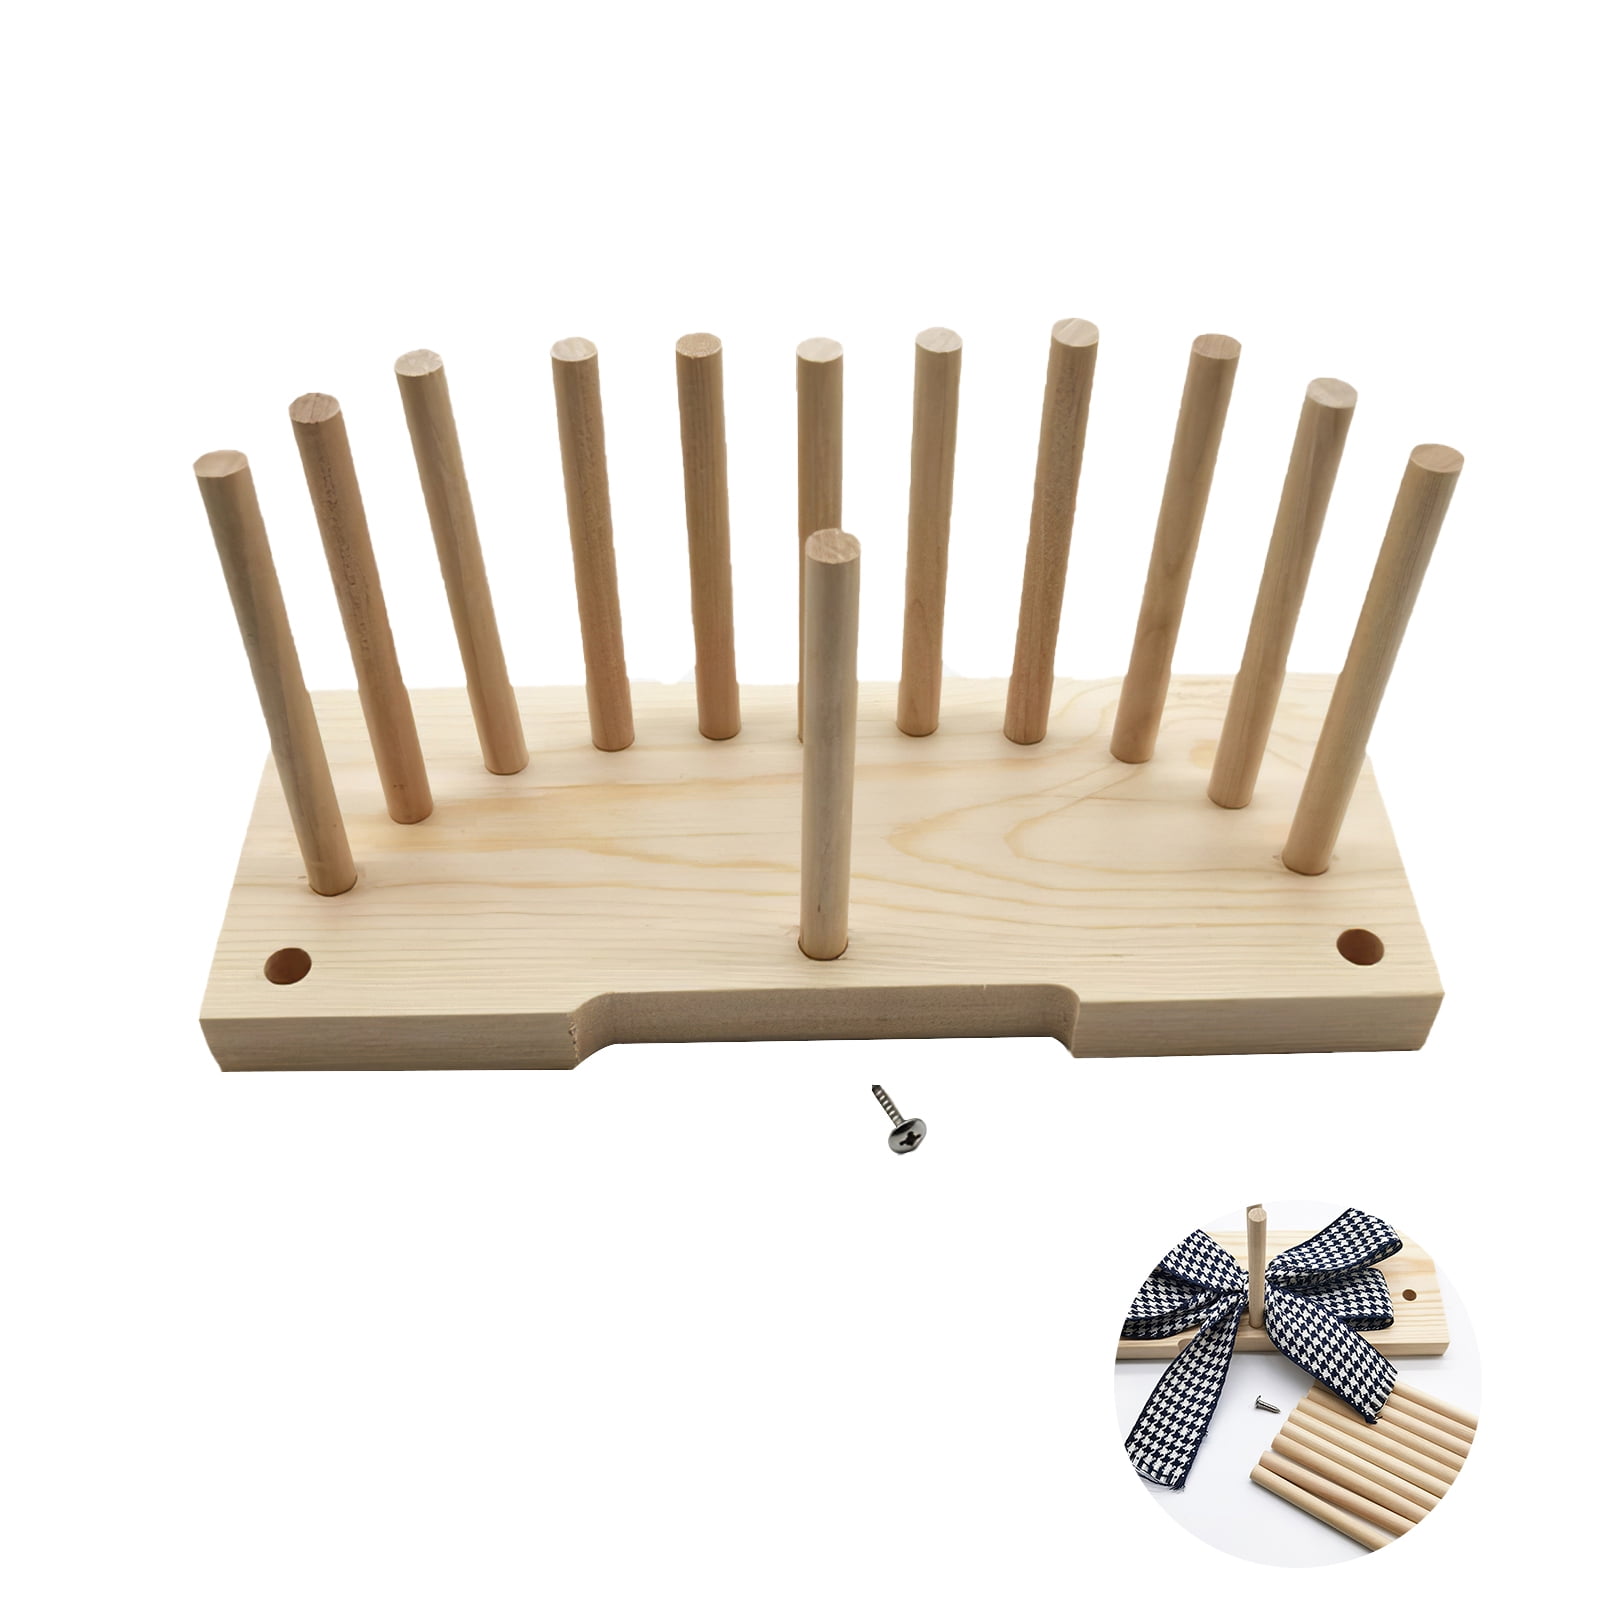 Deepwonder Bow Maker for Ribbon Wreaths, Double Sided Wooden Bow Making Tool  for Crafts Hair Bow Makers Decoration for DIY Christmas Holiday Gift -  Walmart.com